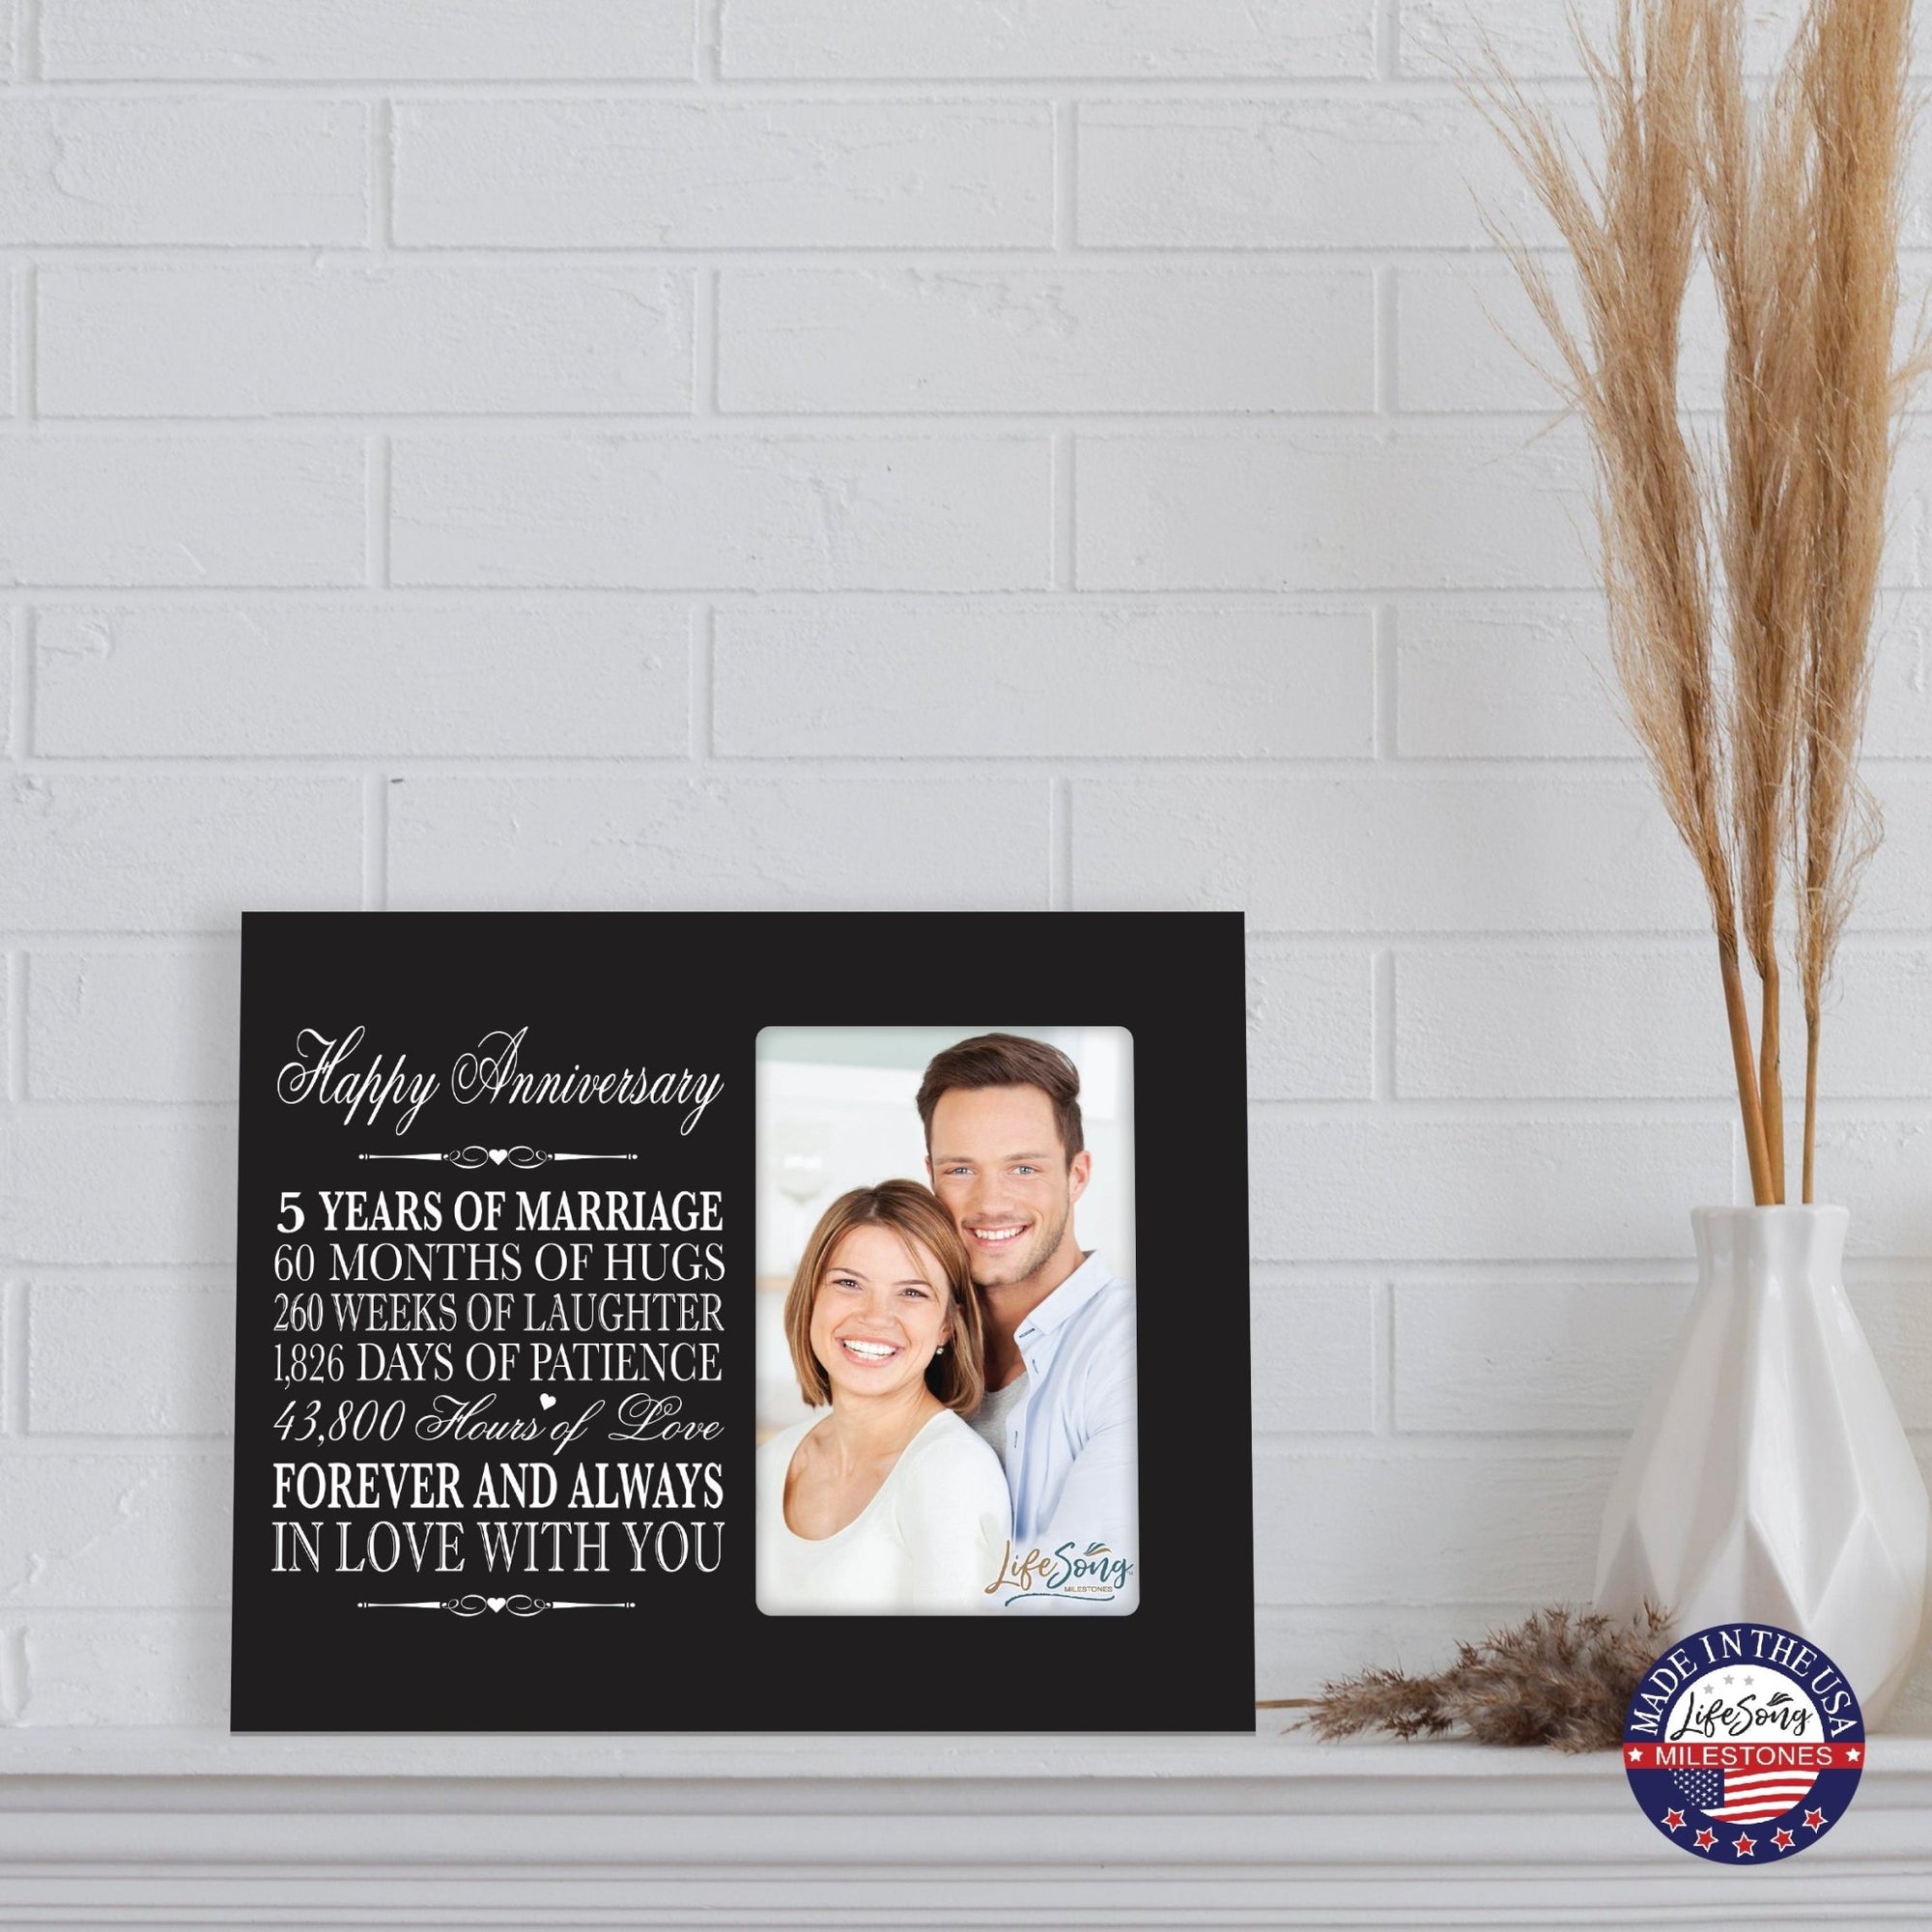 Couples Unique 5th Wedding Anniversary Photo Frame Decorations - Forever and Always - LifeSong Milestones